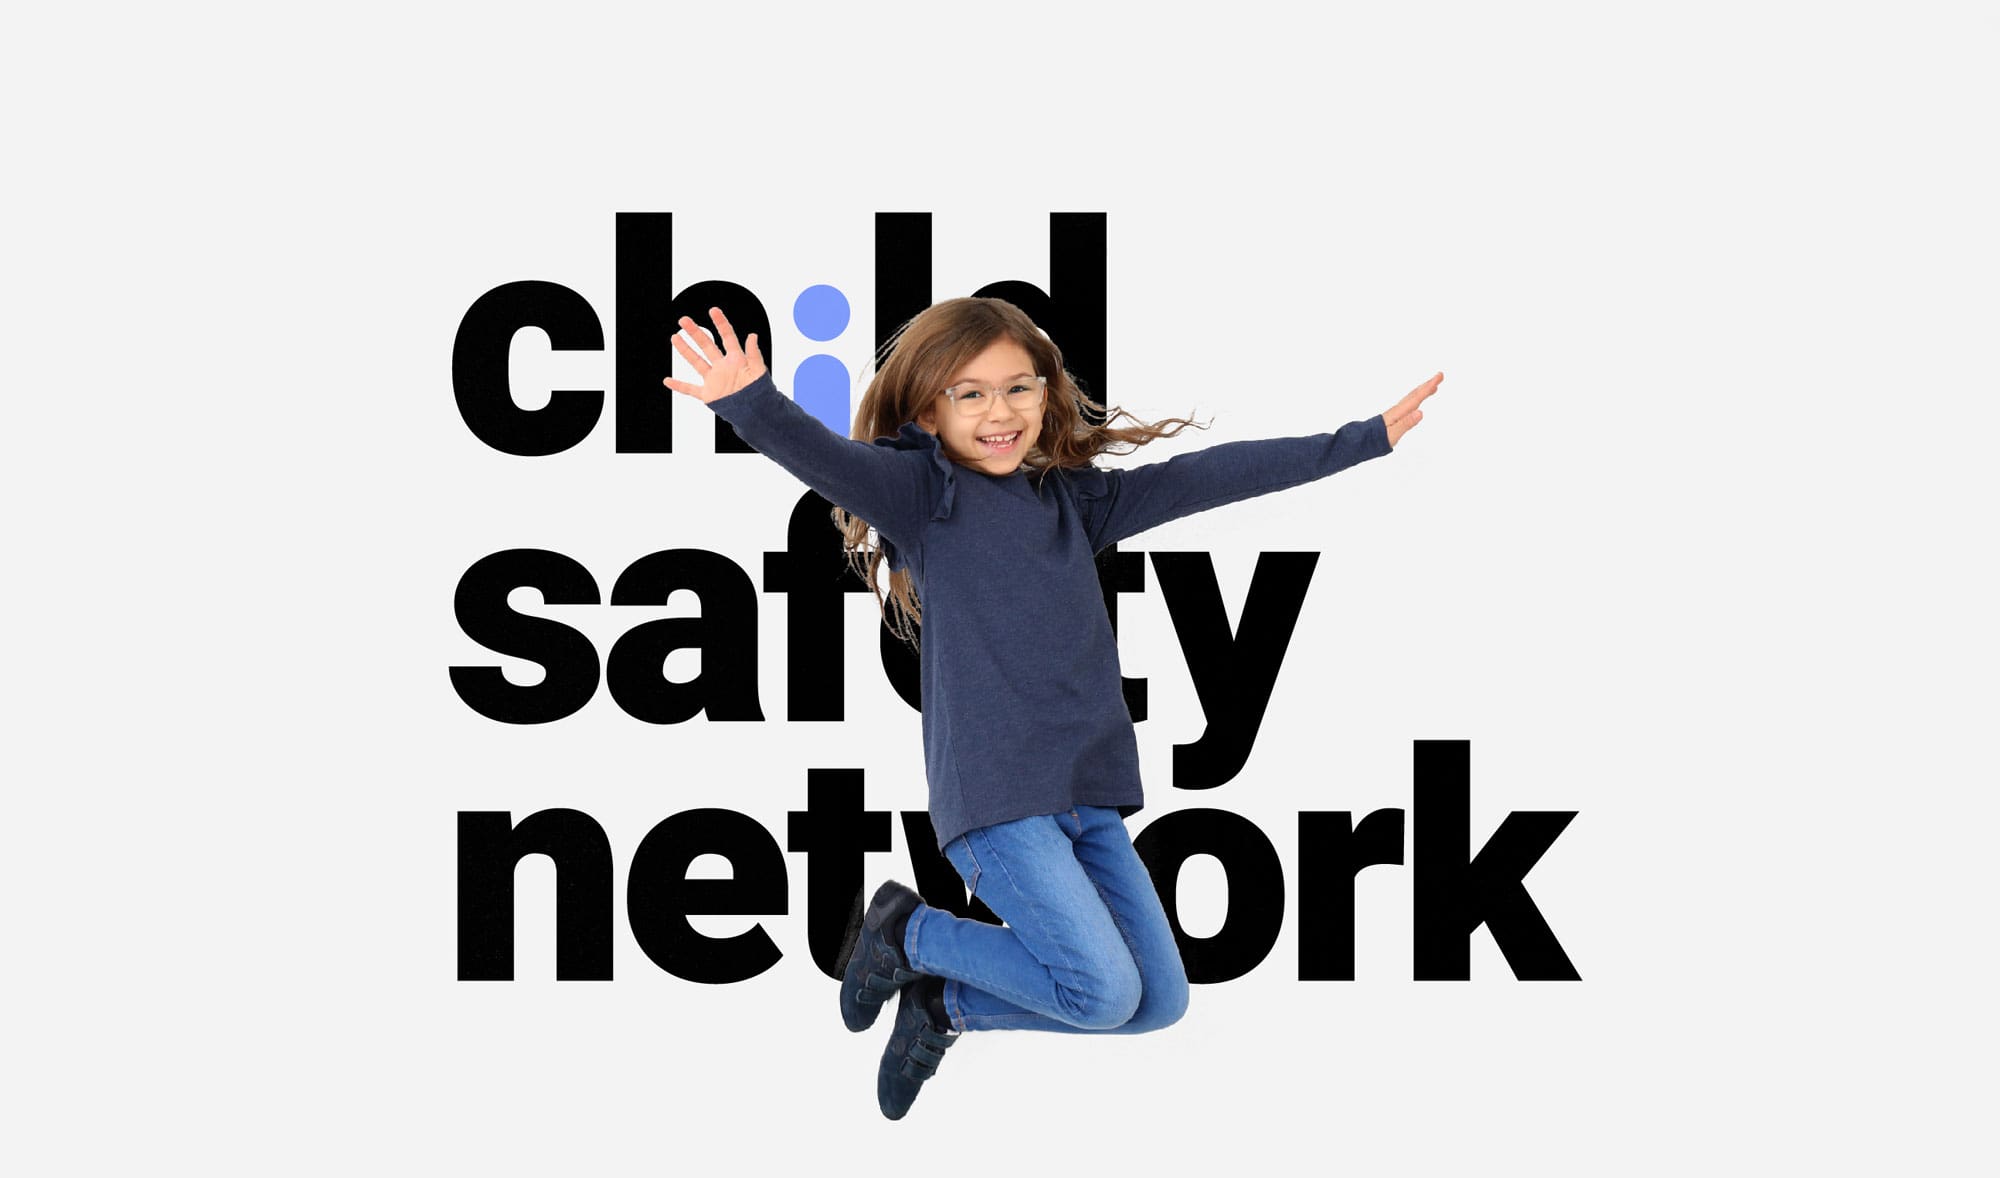 Child Safety Network image of child dancing